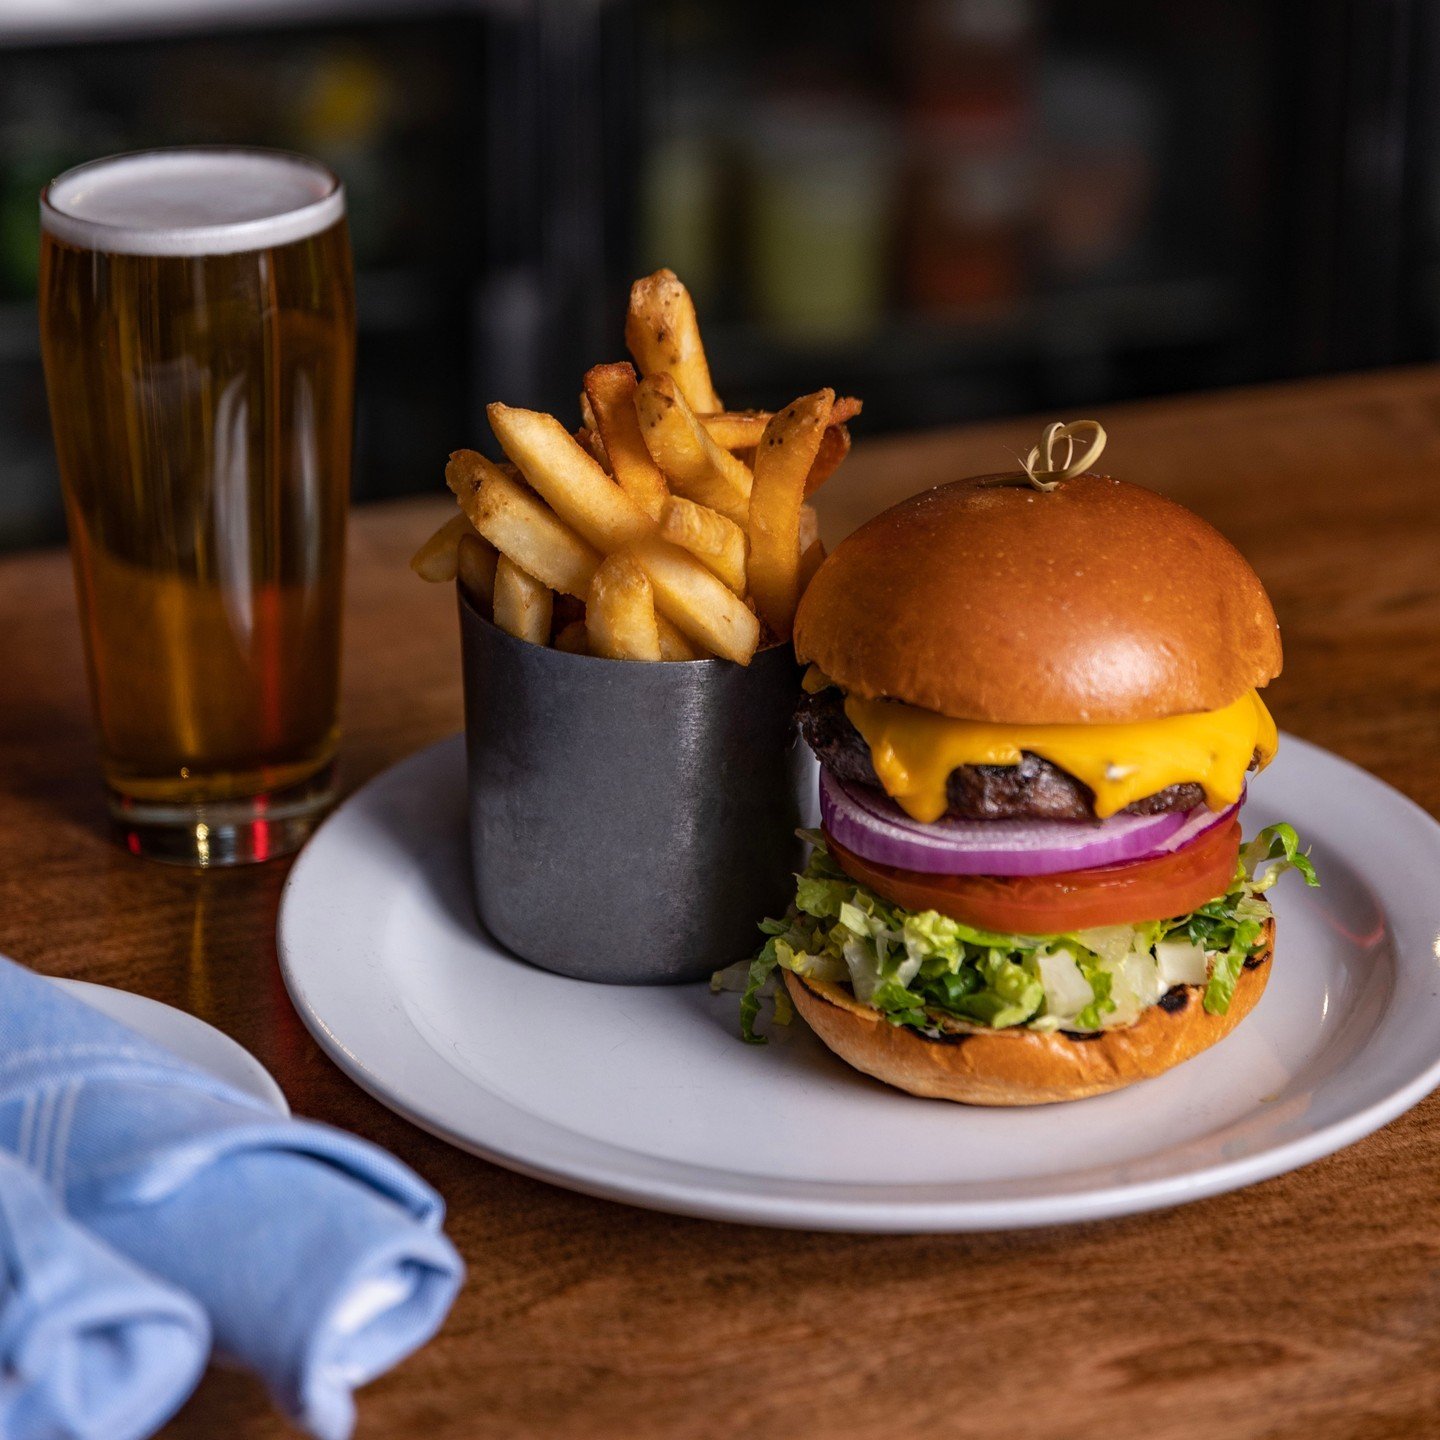 Make Wednesdays your favorite day of the week! Stop by and enjoy any Burger + Beer combo for just $16.
.
.
.
#guslastword #woodridgenj #eatlocal #drinklocal #supportlocal #northjersey #njrestaurants #njeats #cocktails #cocktailbars #craftcocktails #s